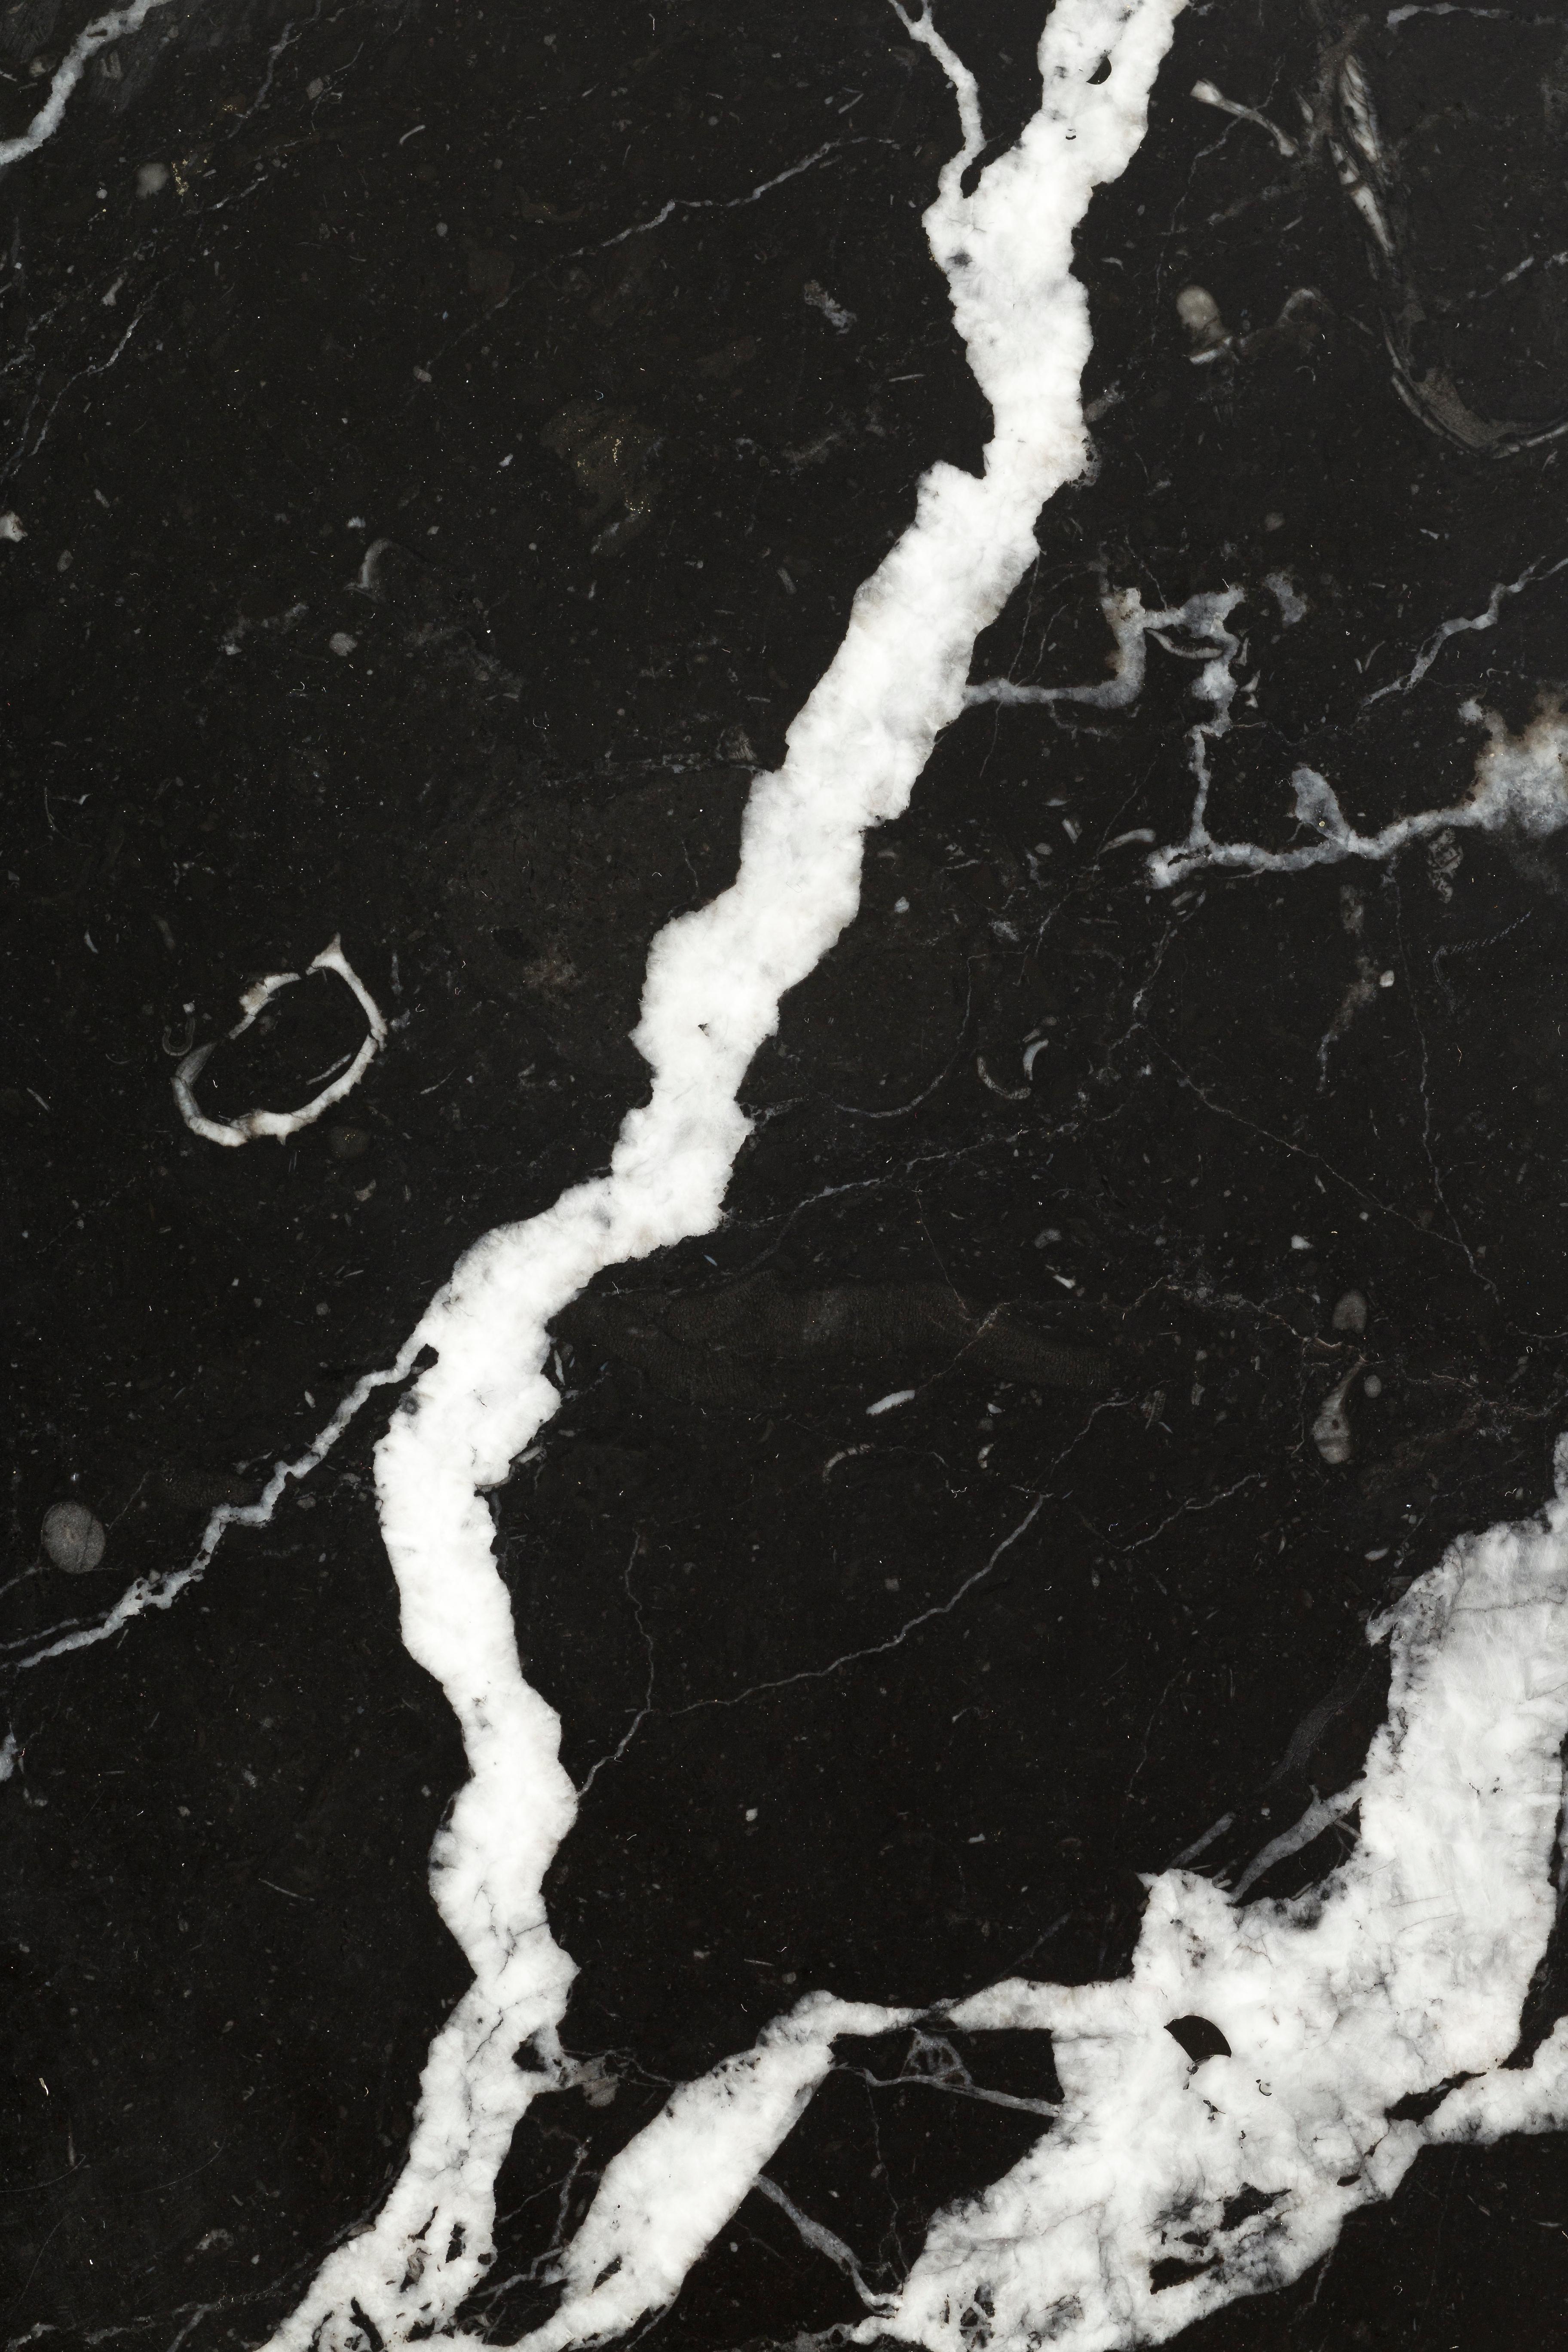 Contemporary New Modern Dish in Black Marquinia Marble, creator Ivan Colominas For Sale